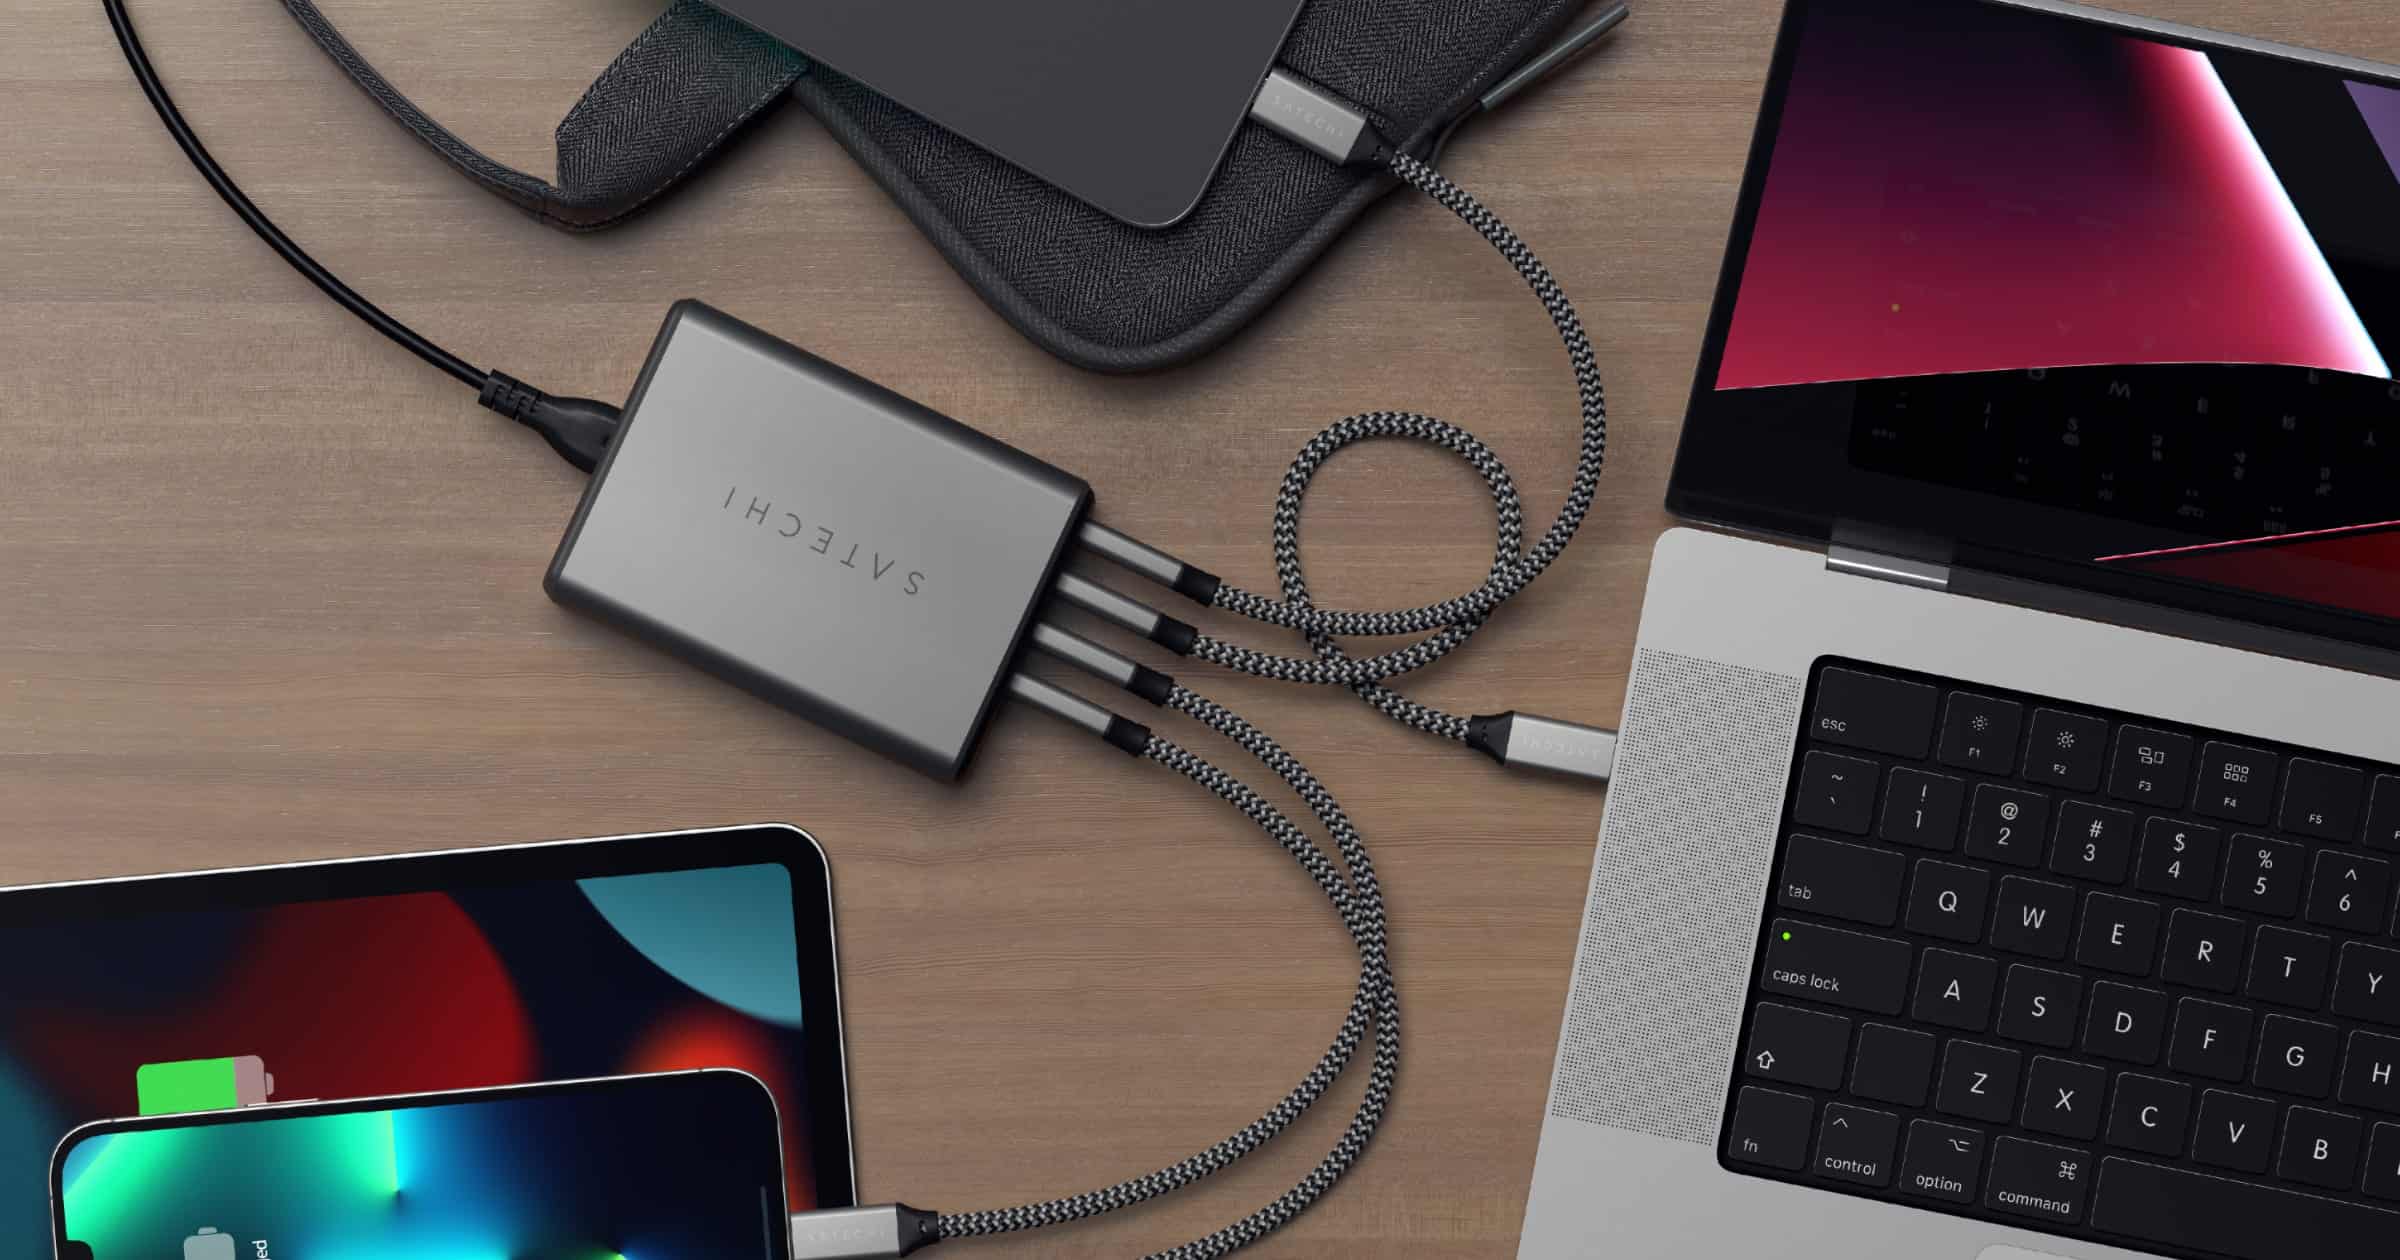 CES 2022: Satechi Releases 165W Charger With 4 USB-C Ports